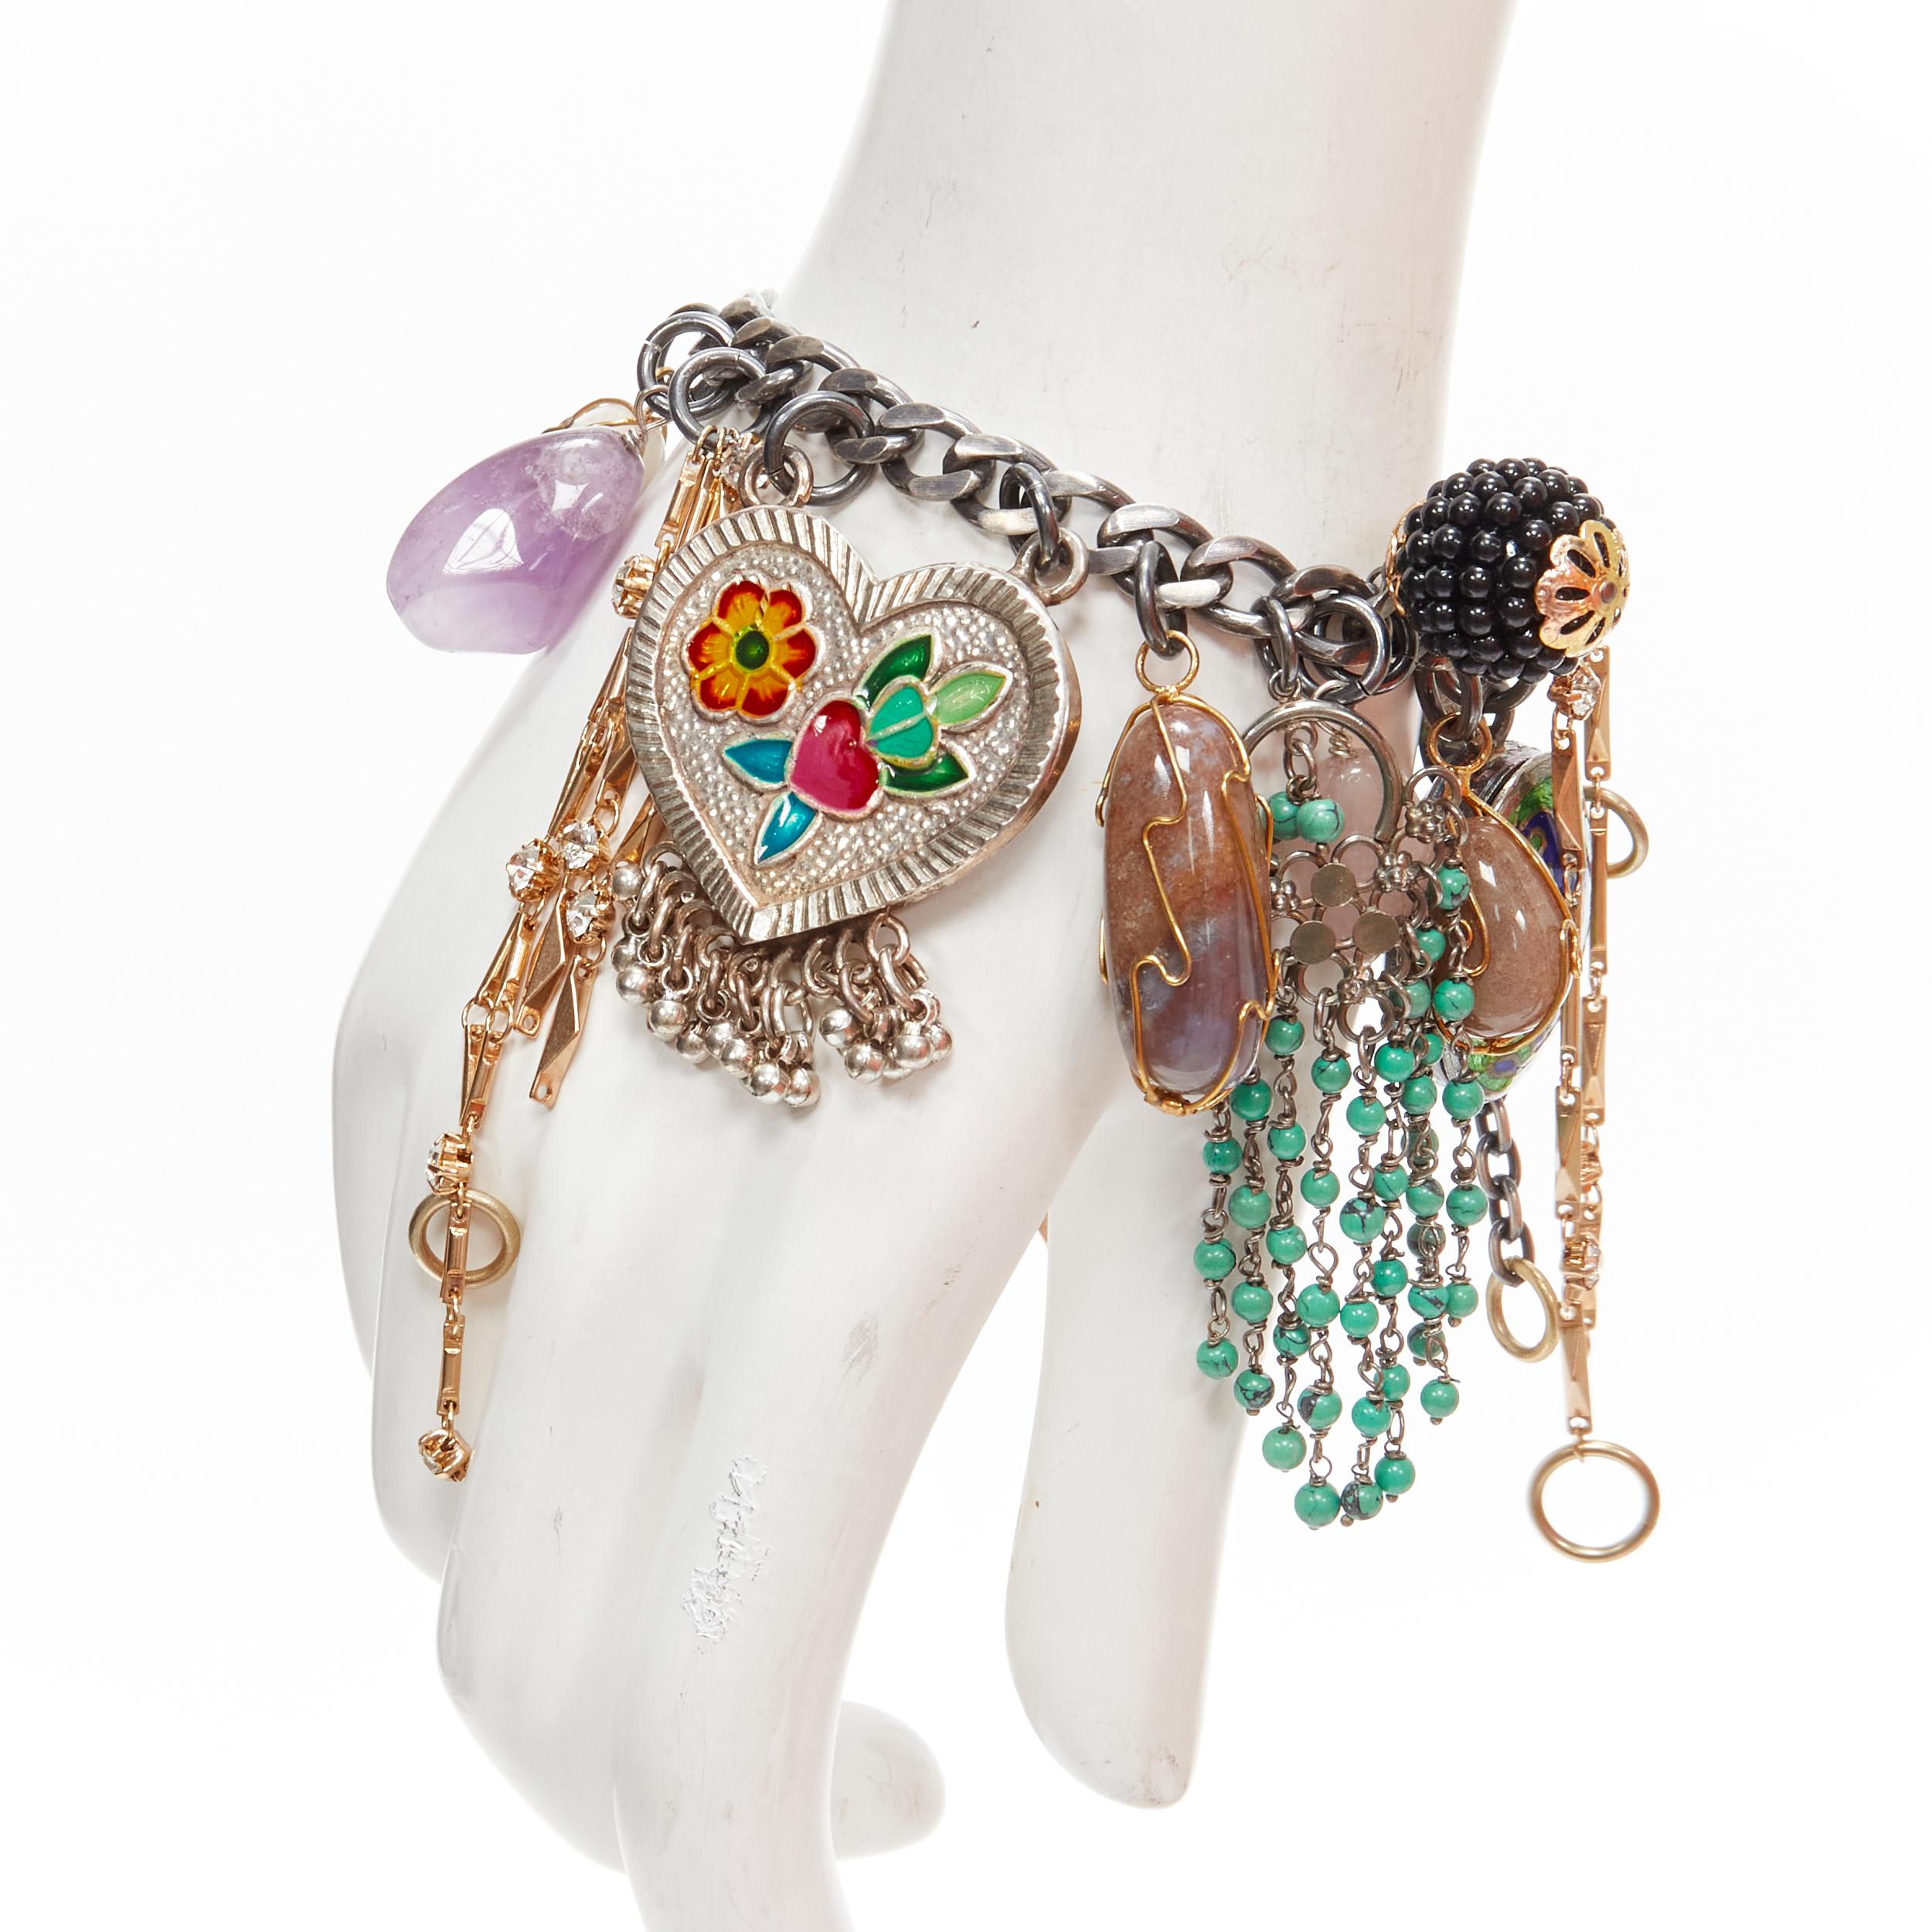 MAWI LONDON faux stone amethyst petalite silver flower chain bracelet
Reference: ANWU/A00300
Brand: Mawi London
Material: Metal, Plastic
Color: Multicolour
Pattern: Graphic
Closure: Loop Through
Extra Details: Loop through